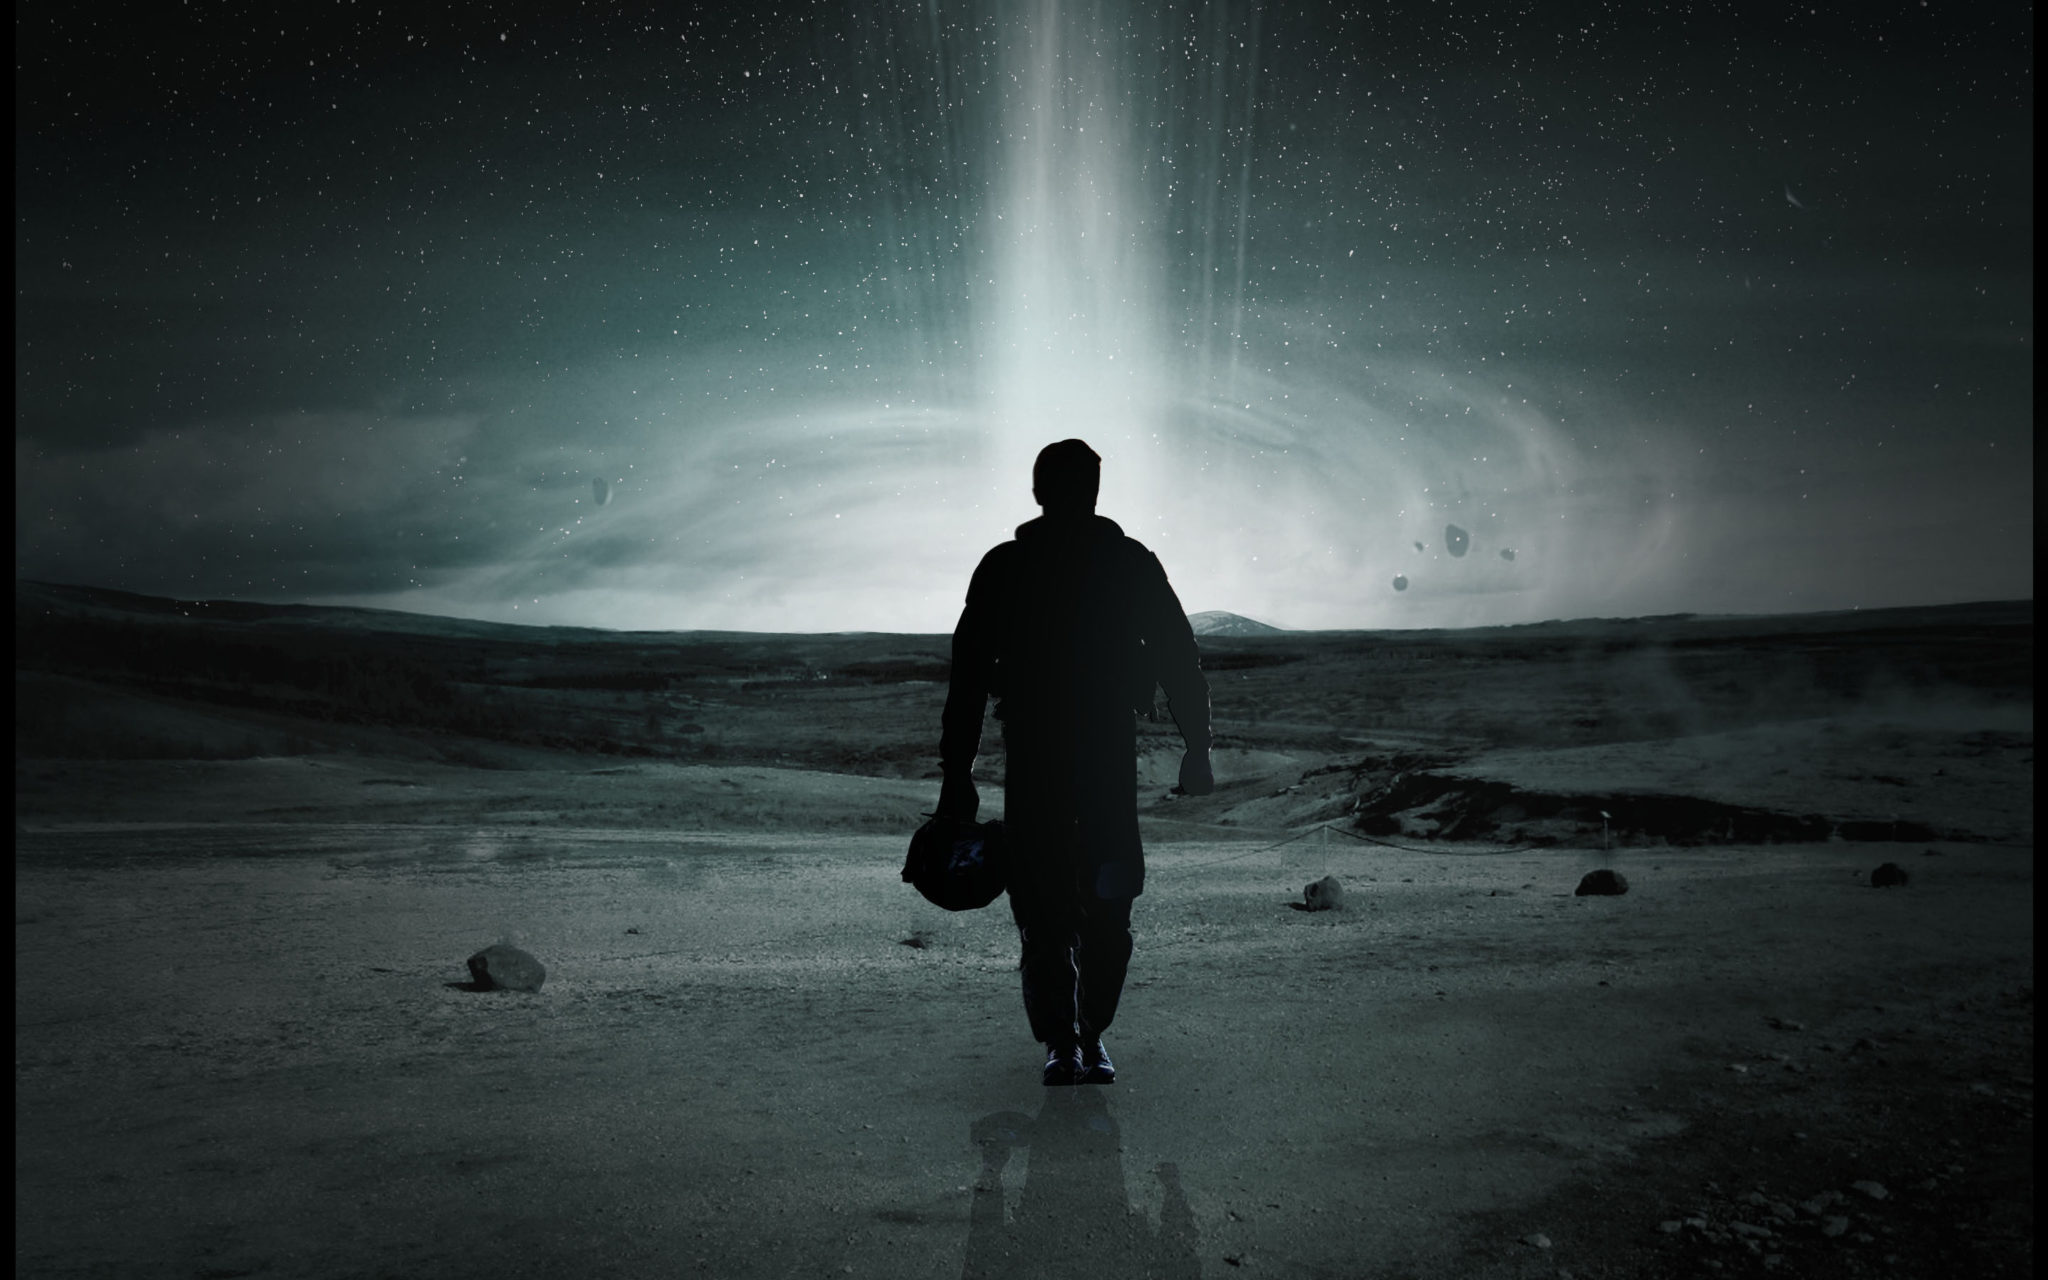 I Explored ‘Interstellar’ Using Oculus Rift. What I Found Was the Future of Storytelling